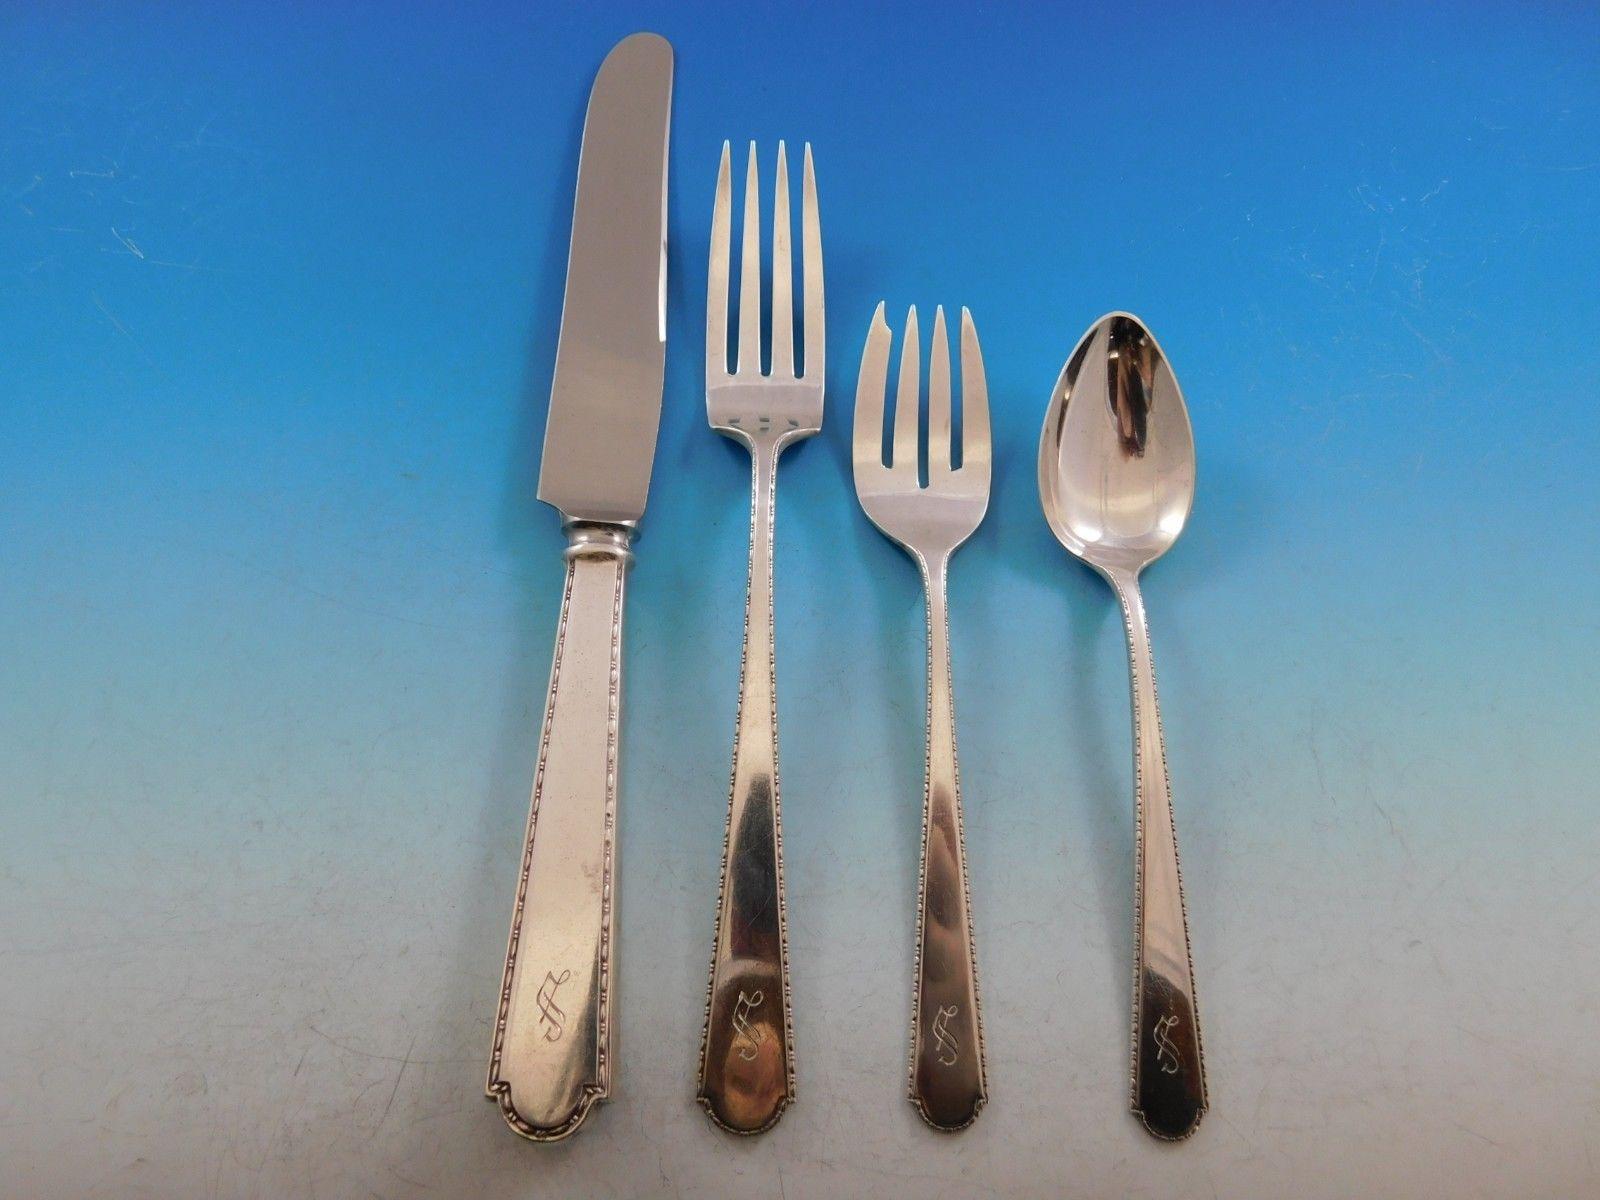 Lovely Virginia Sterling by Weidlich sterling silver flatware set, 65 pieces. This set includes:

10 knives, 9 1/4